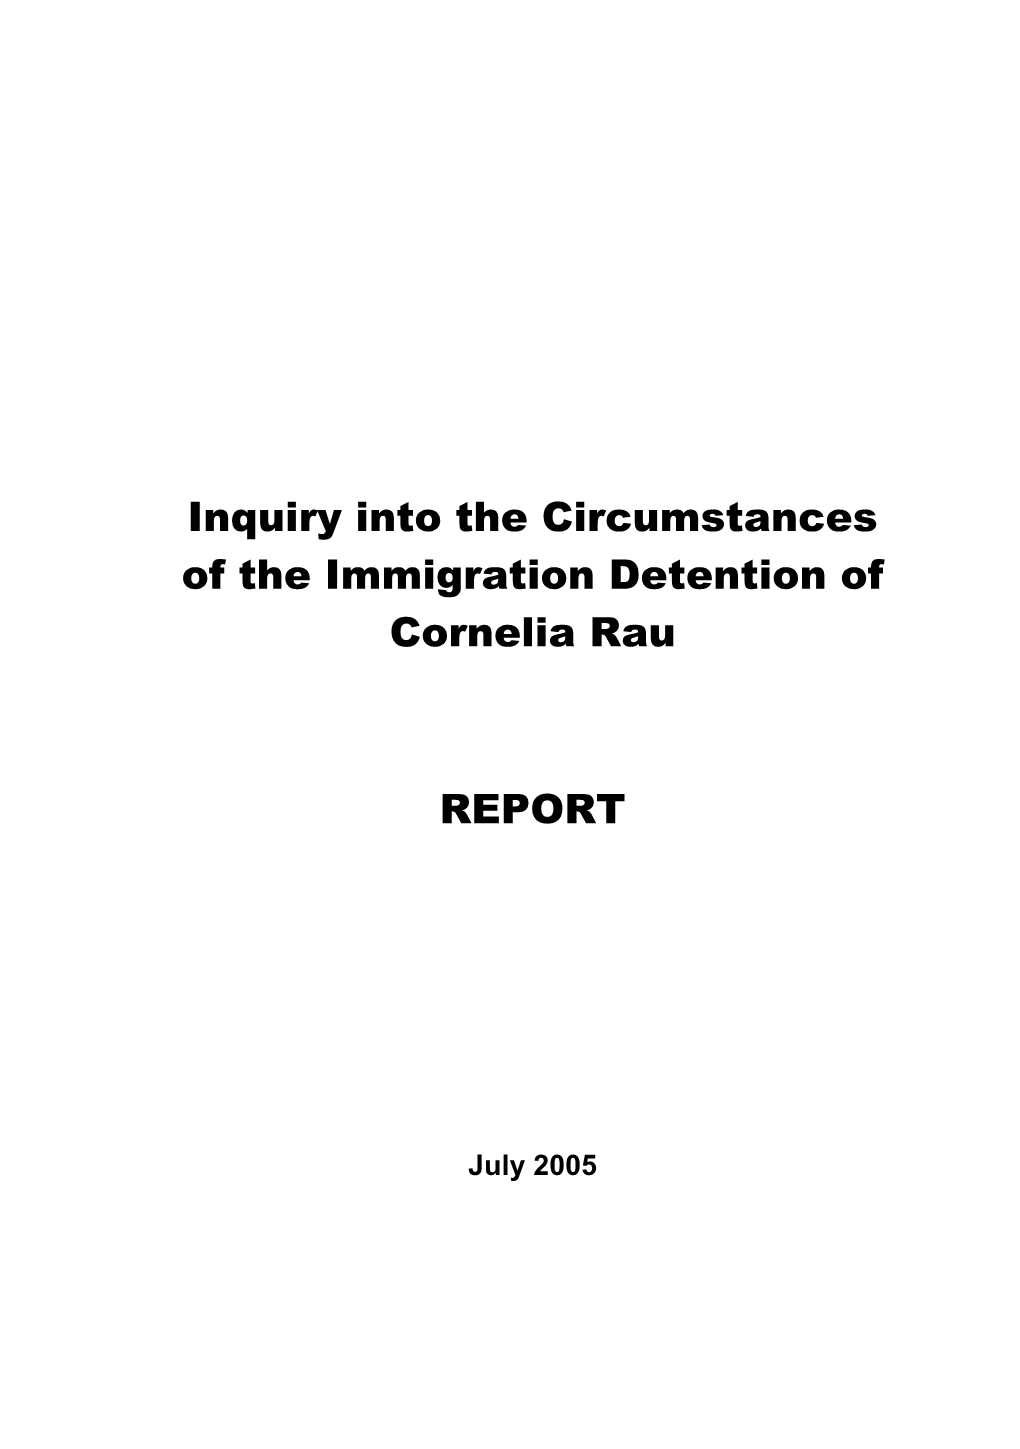 Inquiry Into the Circumstances of the Immigration Detention of Cornelia Rau